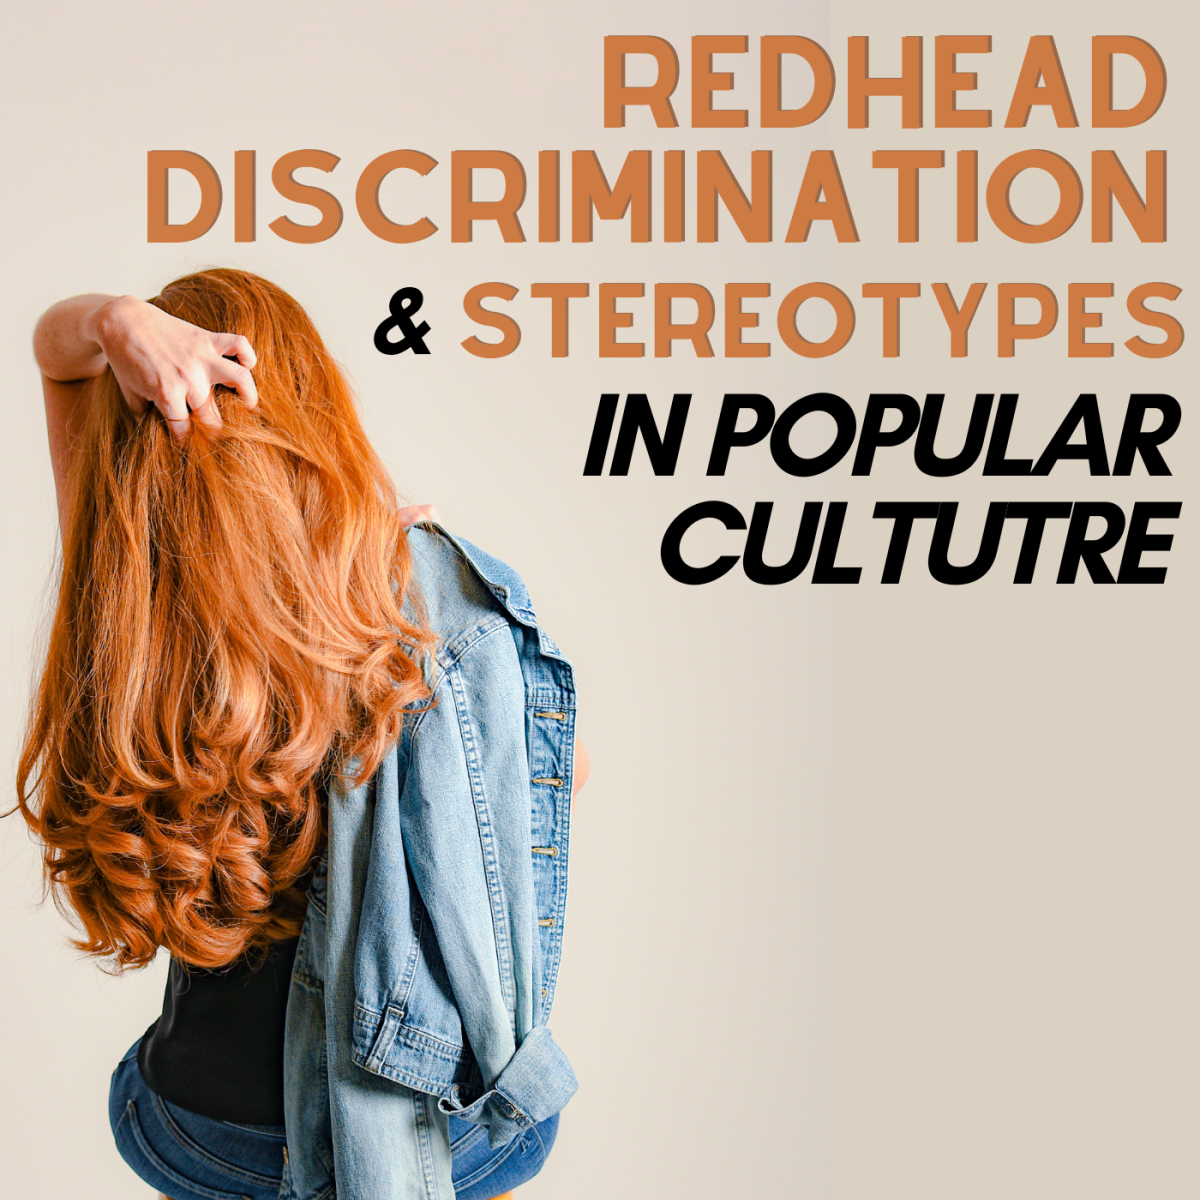 Why Do People Hate Redheads?